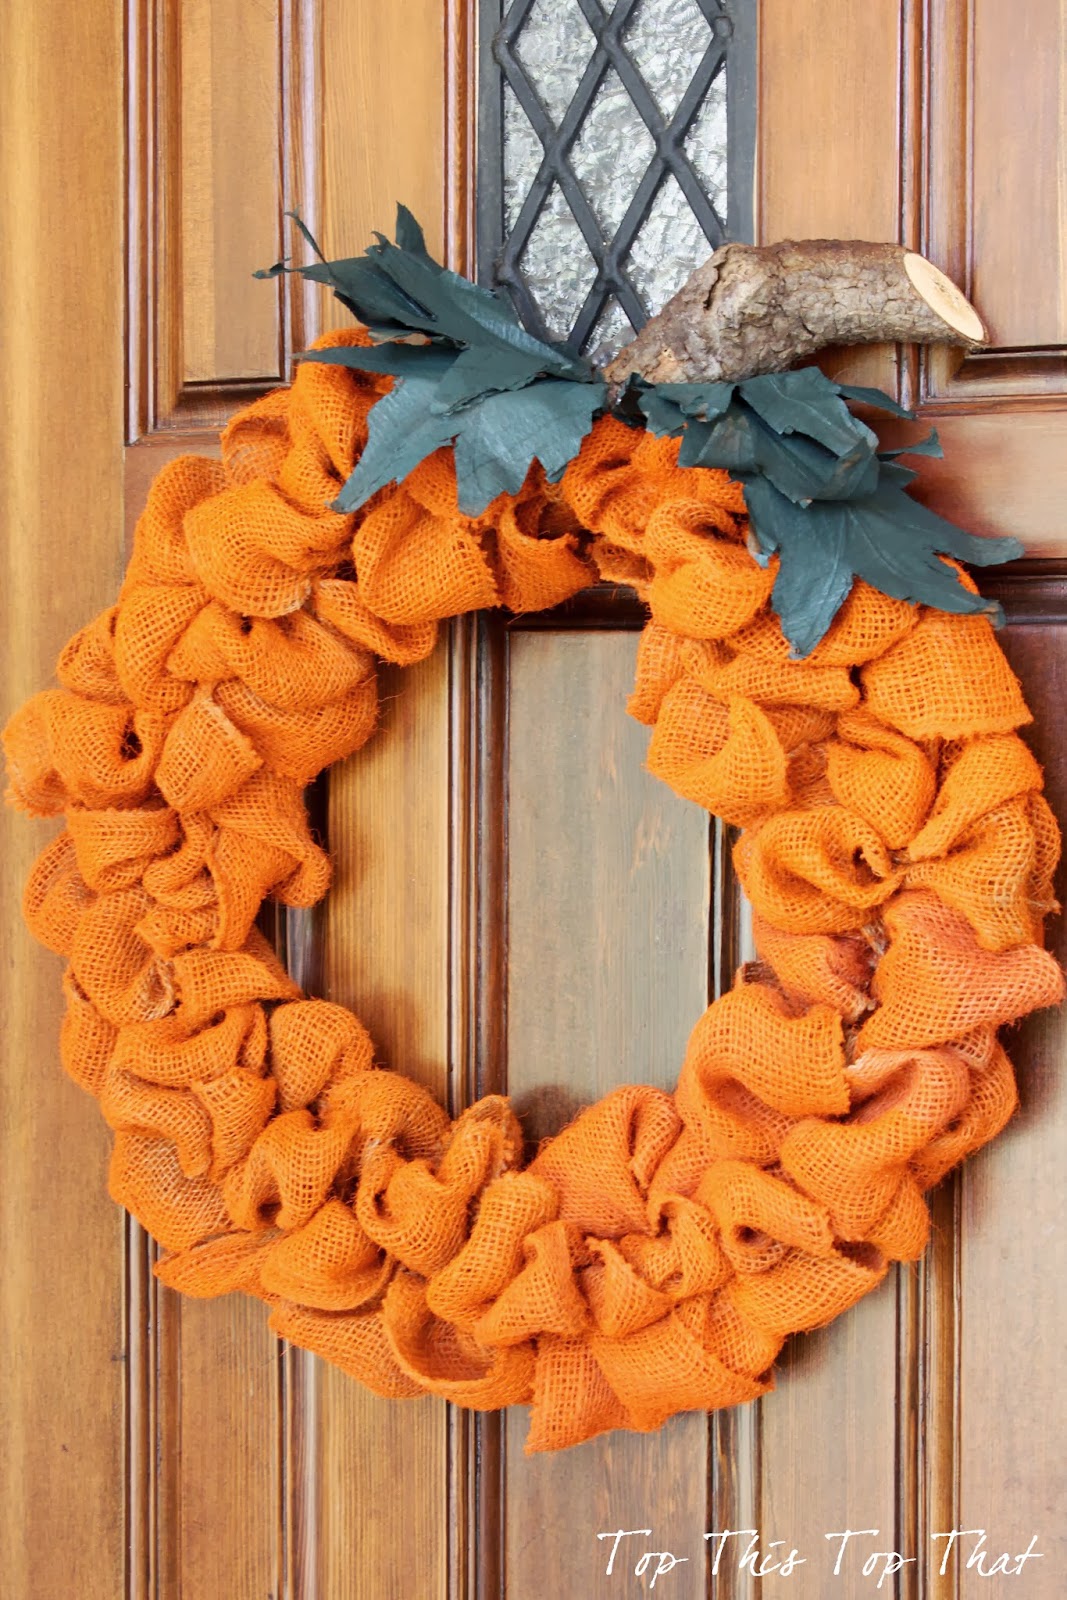 Simple DIY Burlap Wreath With Fall Flowers – Practically Functional